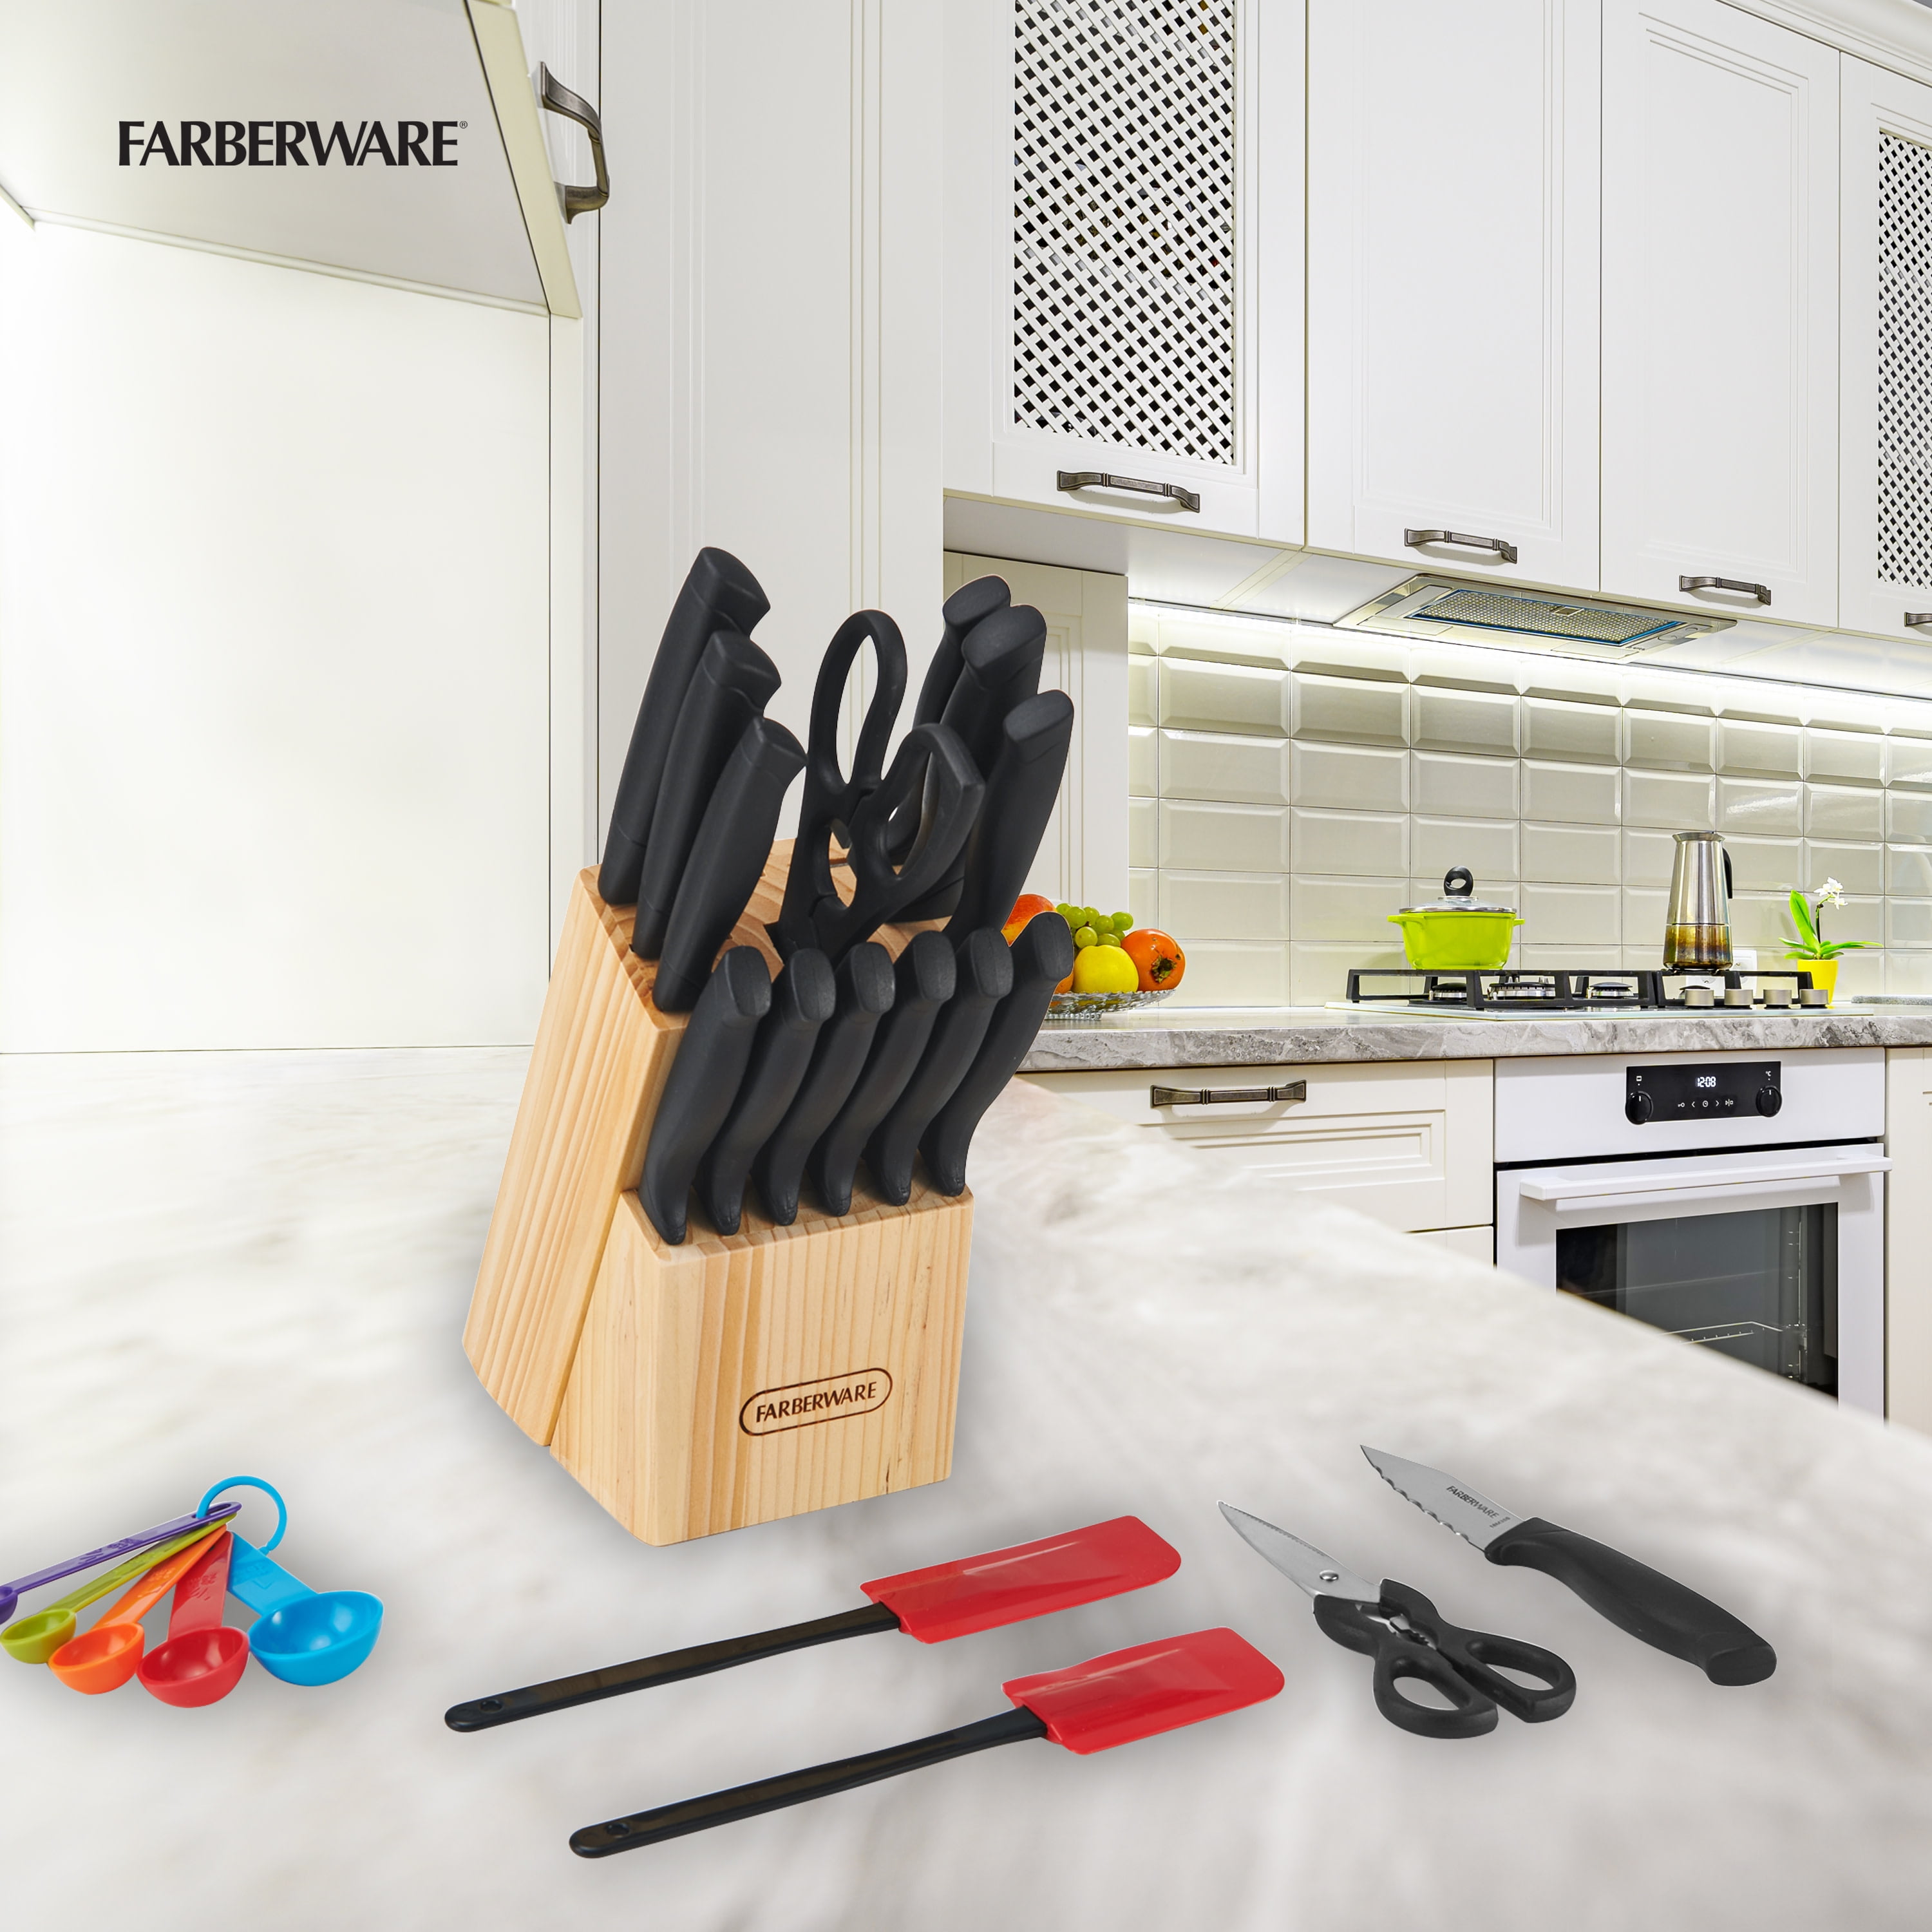 Farberware® Never Needs Sharpening Cutlery Set, 22 pc - Fry's Food Stores